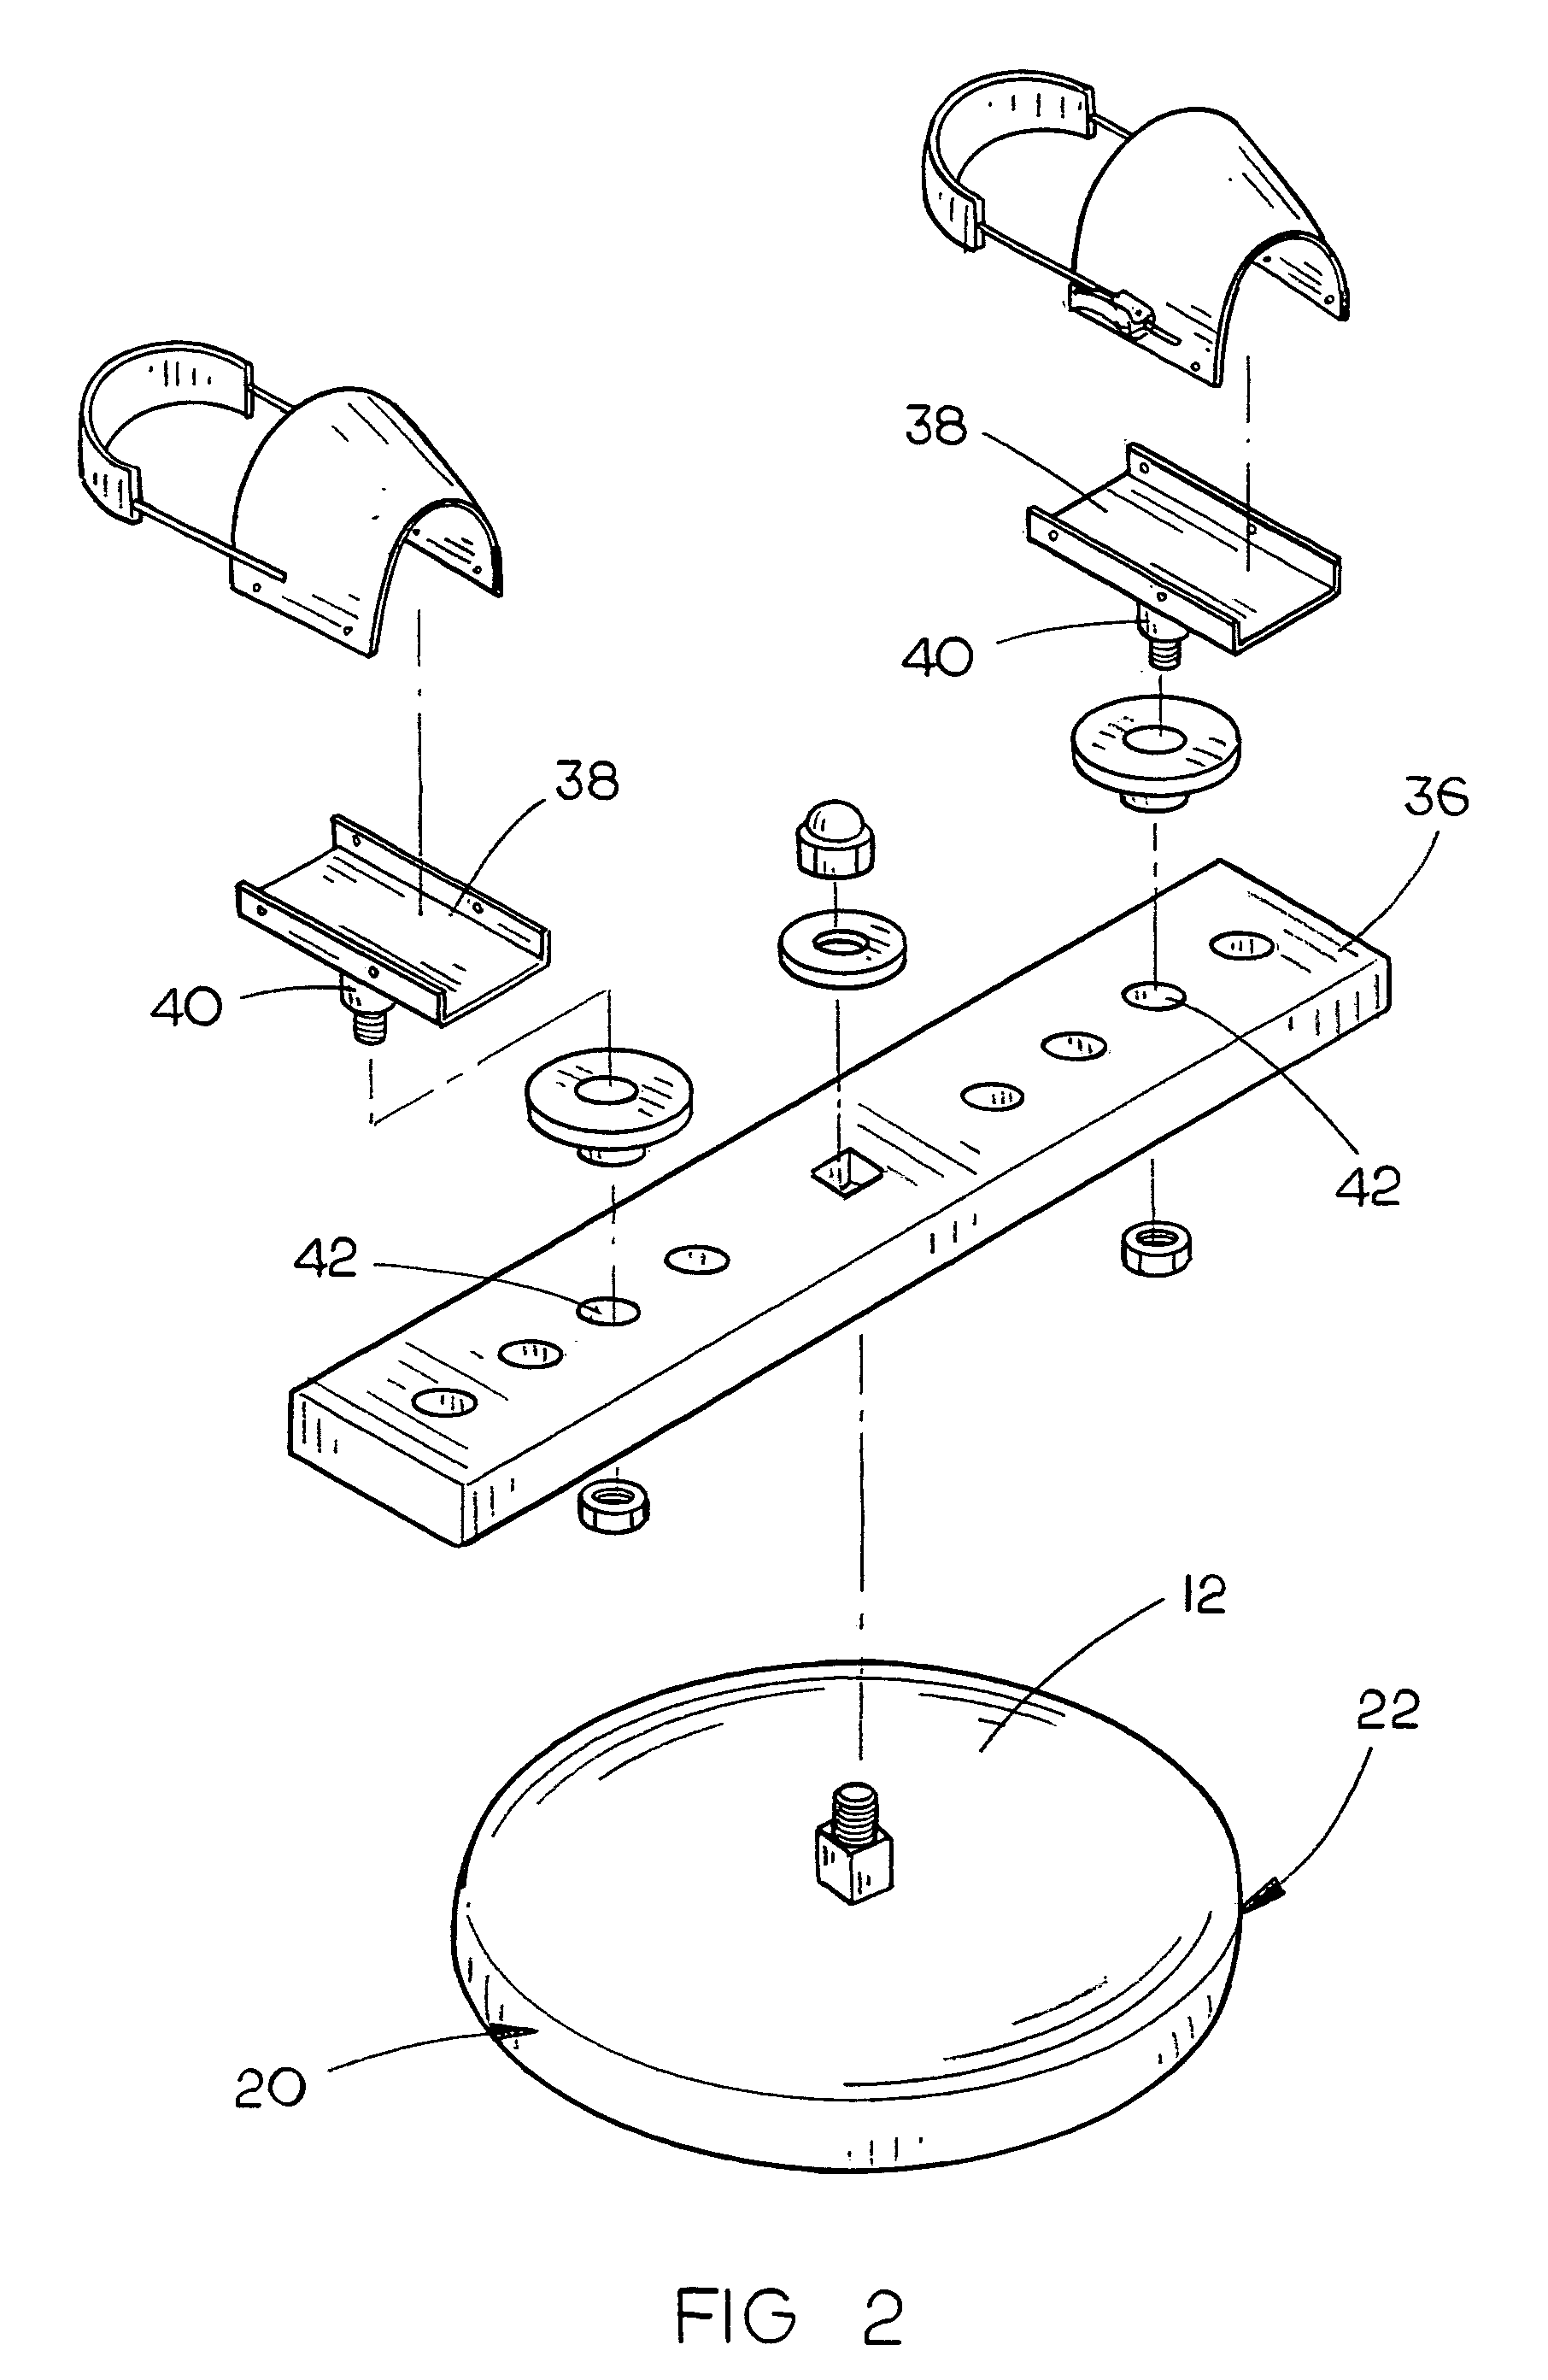 Method and system for assisting individual ambulation